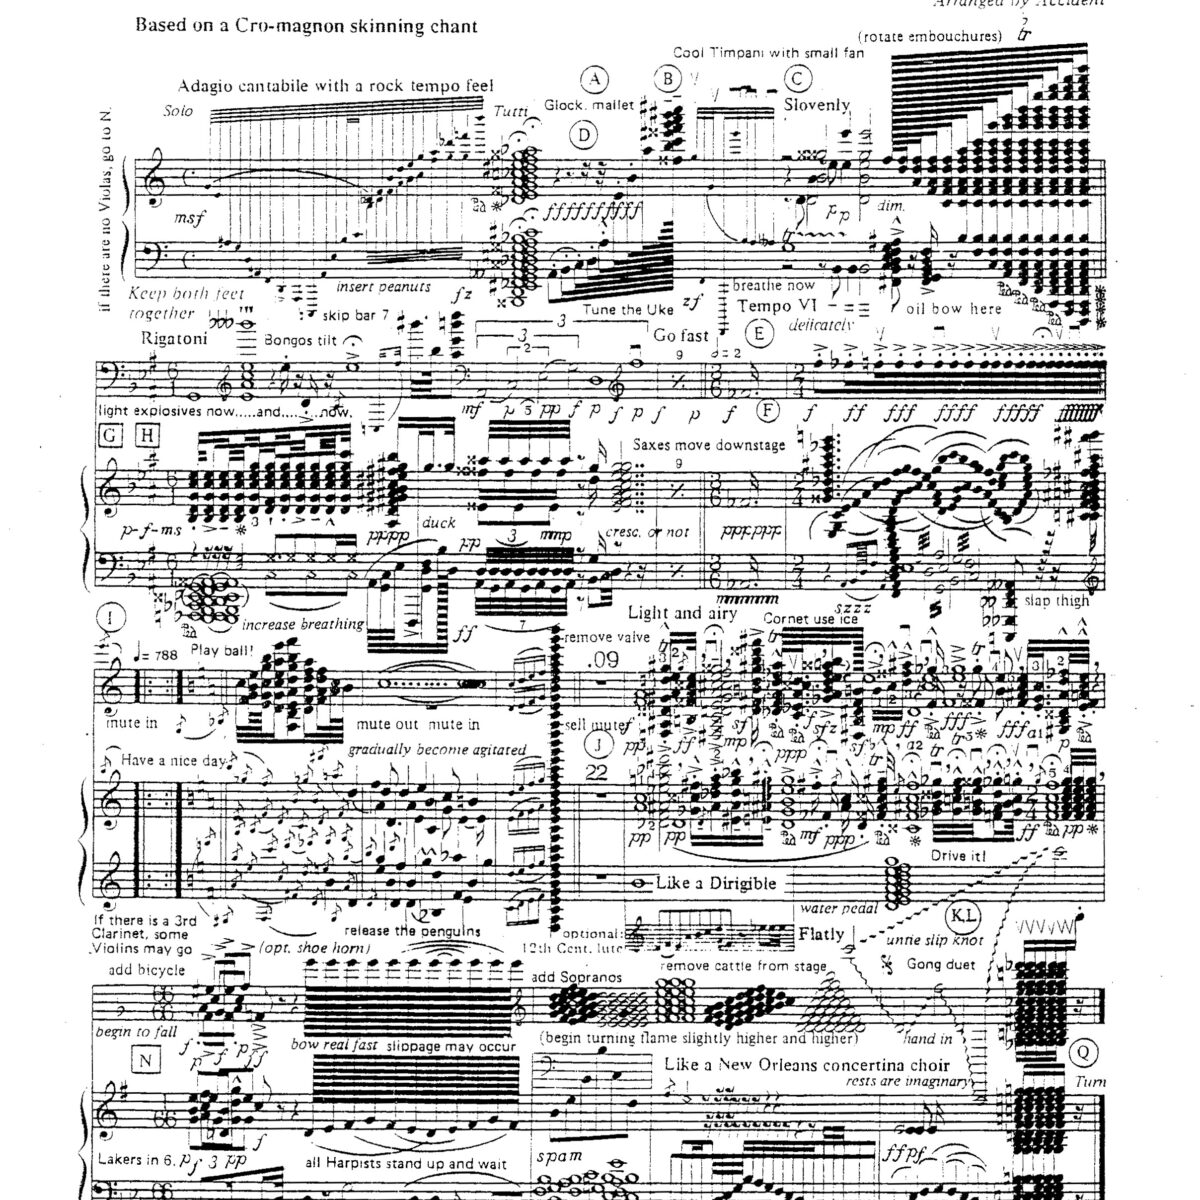 Take Me Out to the Ball Game for clarinet - free sheet music, printable PDF